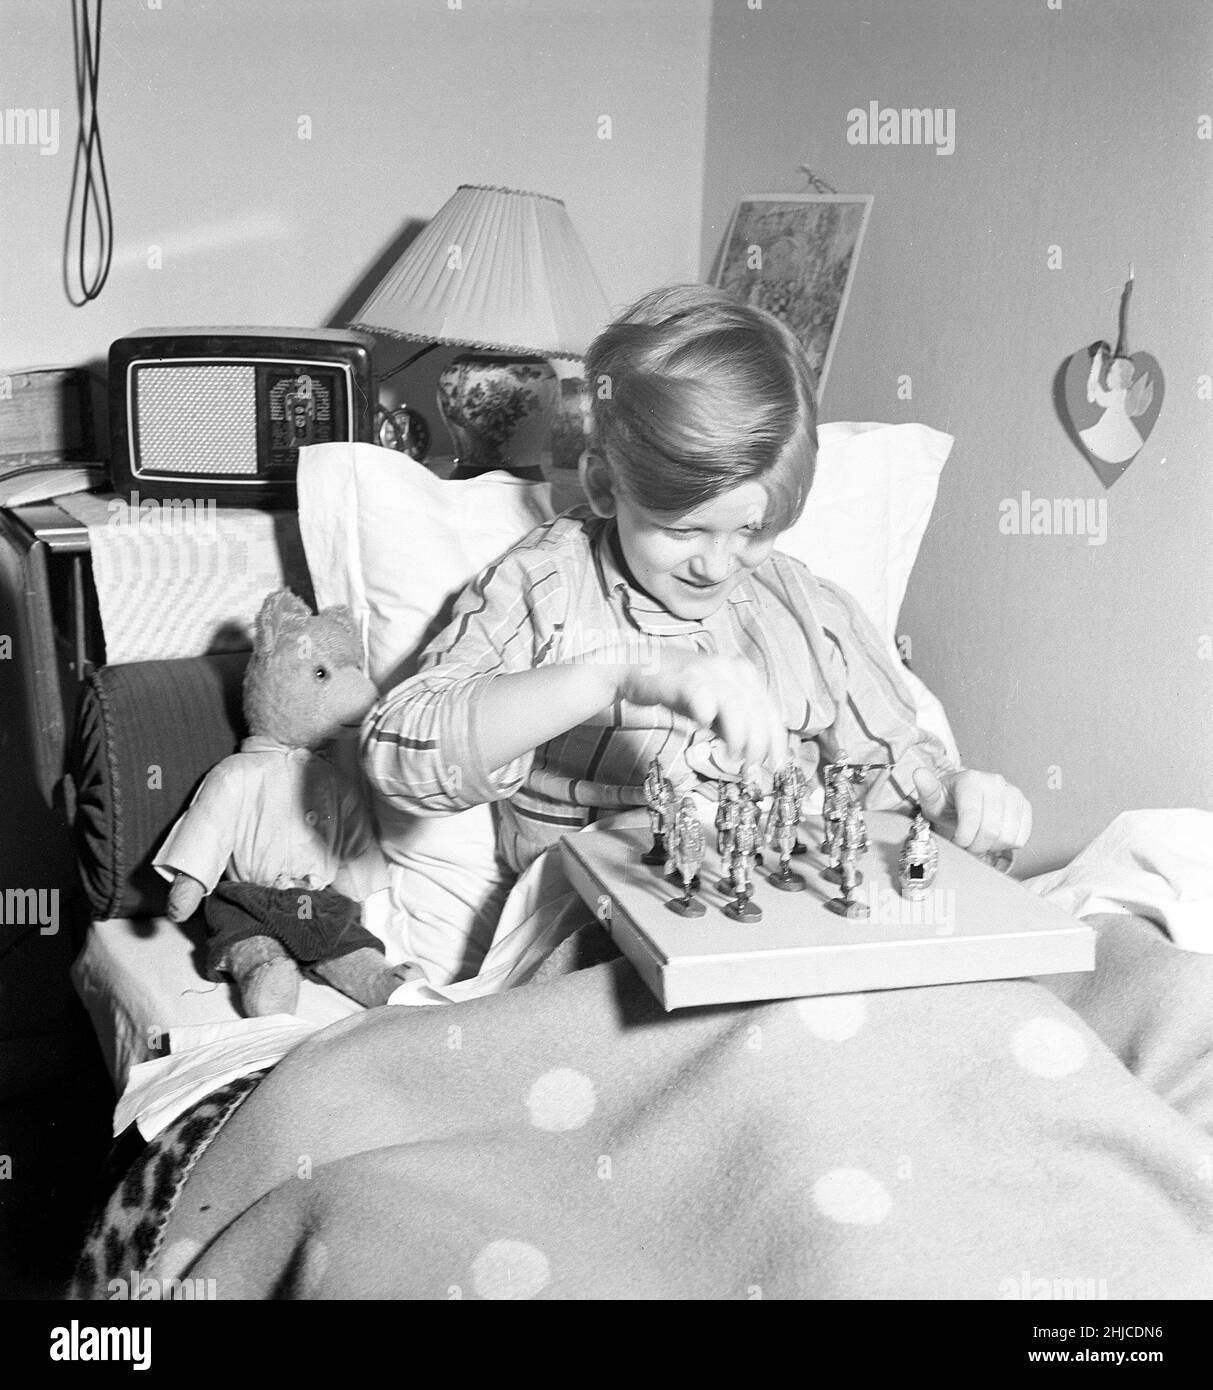 Toys in the 1940s. A boy in his bed is playing with toy soldiers. The german toys are made by Elastolin and features german soldiers in uniform. The figures were popular during the world war 2 even in other countries than Germany. Often with the nazi symbol featured on the flags and uniforms of the toys.  february 1940 Kristoffersson ref L79-3 Stock Photo